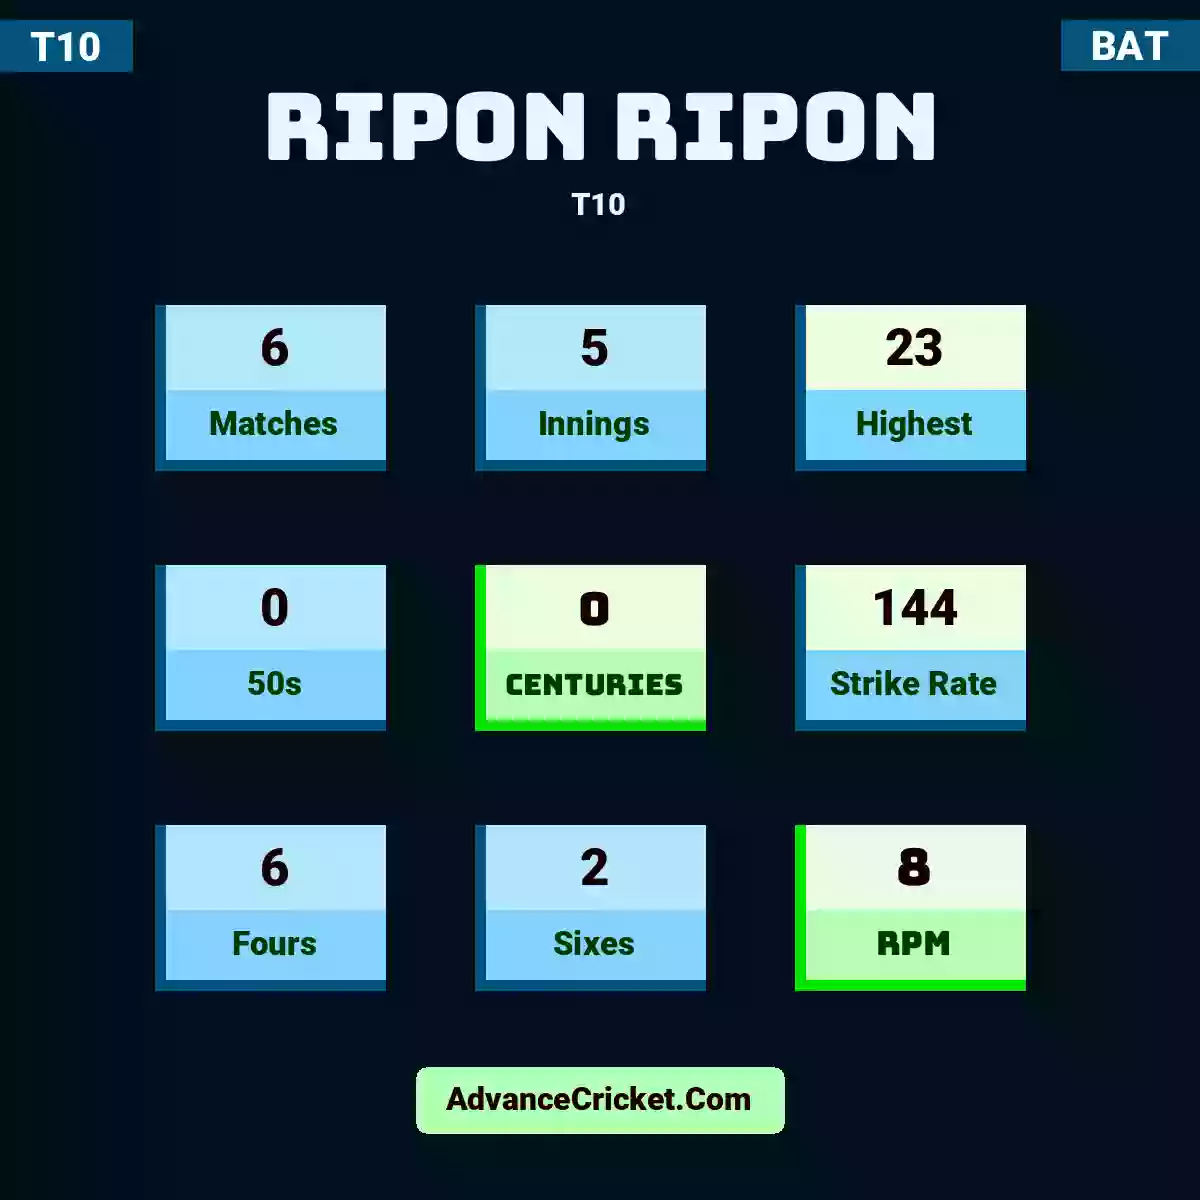 Ripon Ripon T10 , Ripon Ripon played 6 matches, scored 23 runs as highest, 0 half-centuries, and 0 centuries, with a strike rate of 144. R.Ripon hit 6 fours and 2 sixes, with an RPM of 8.